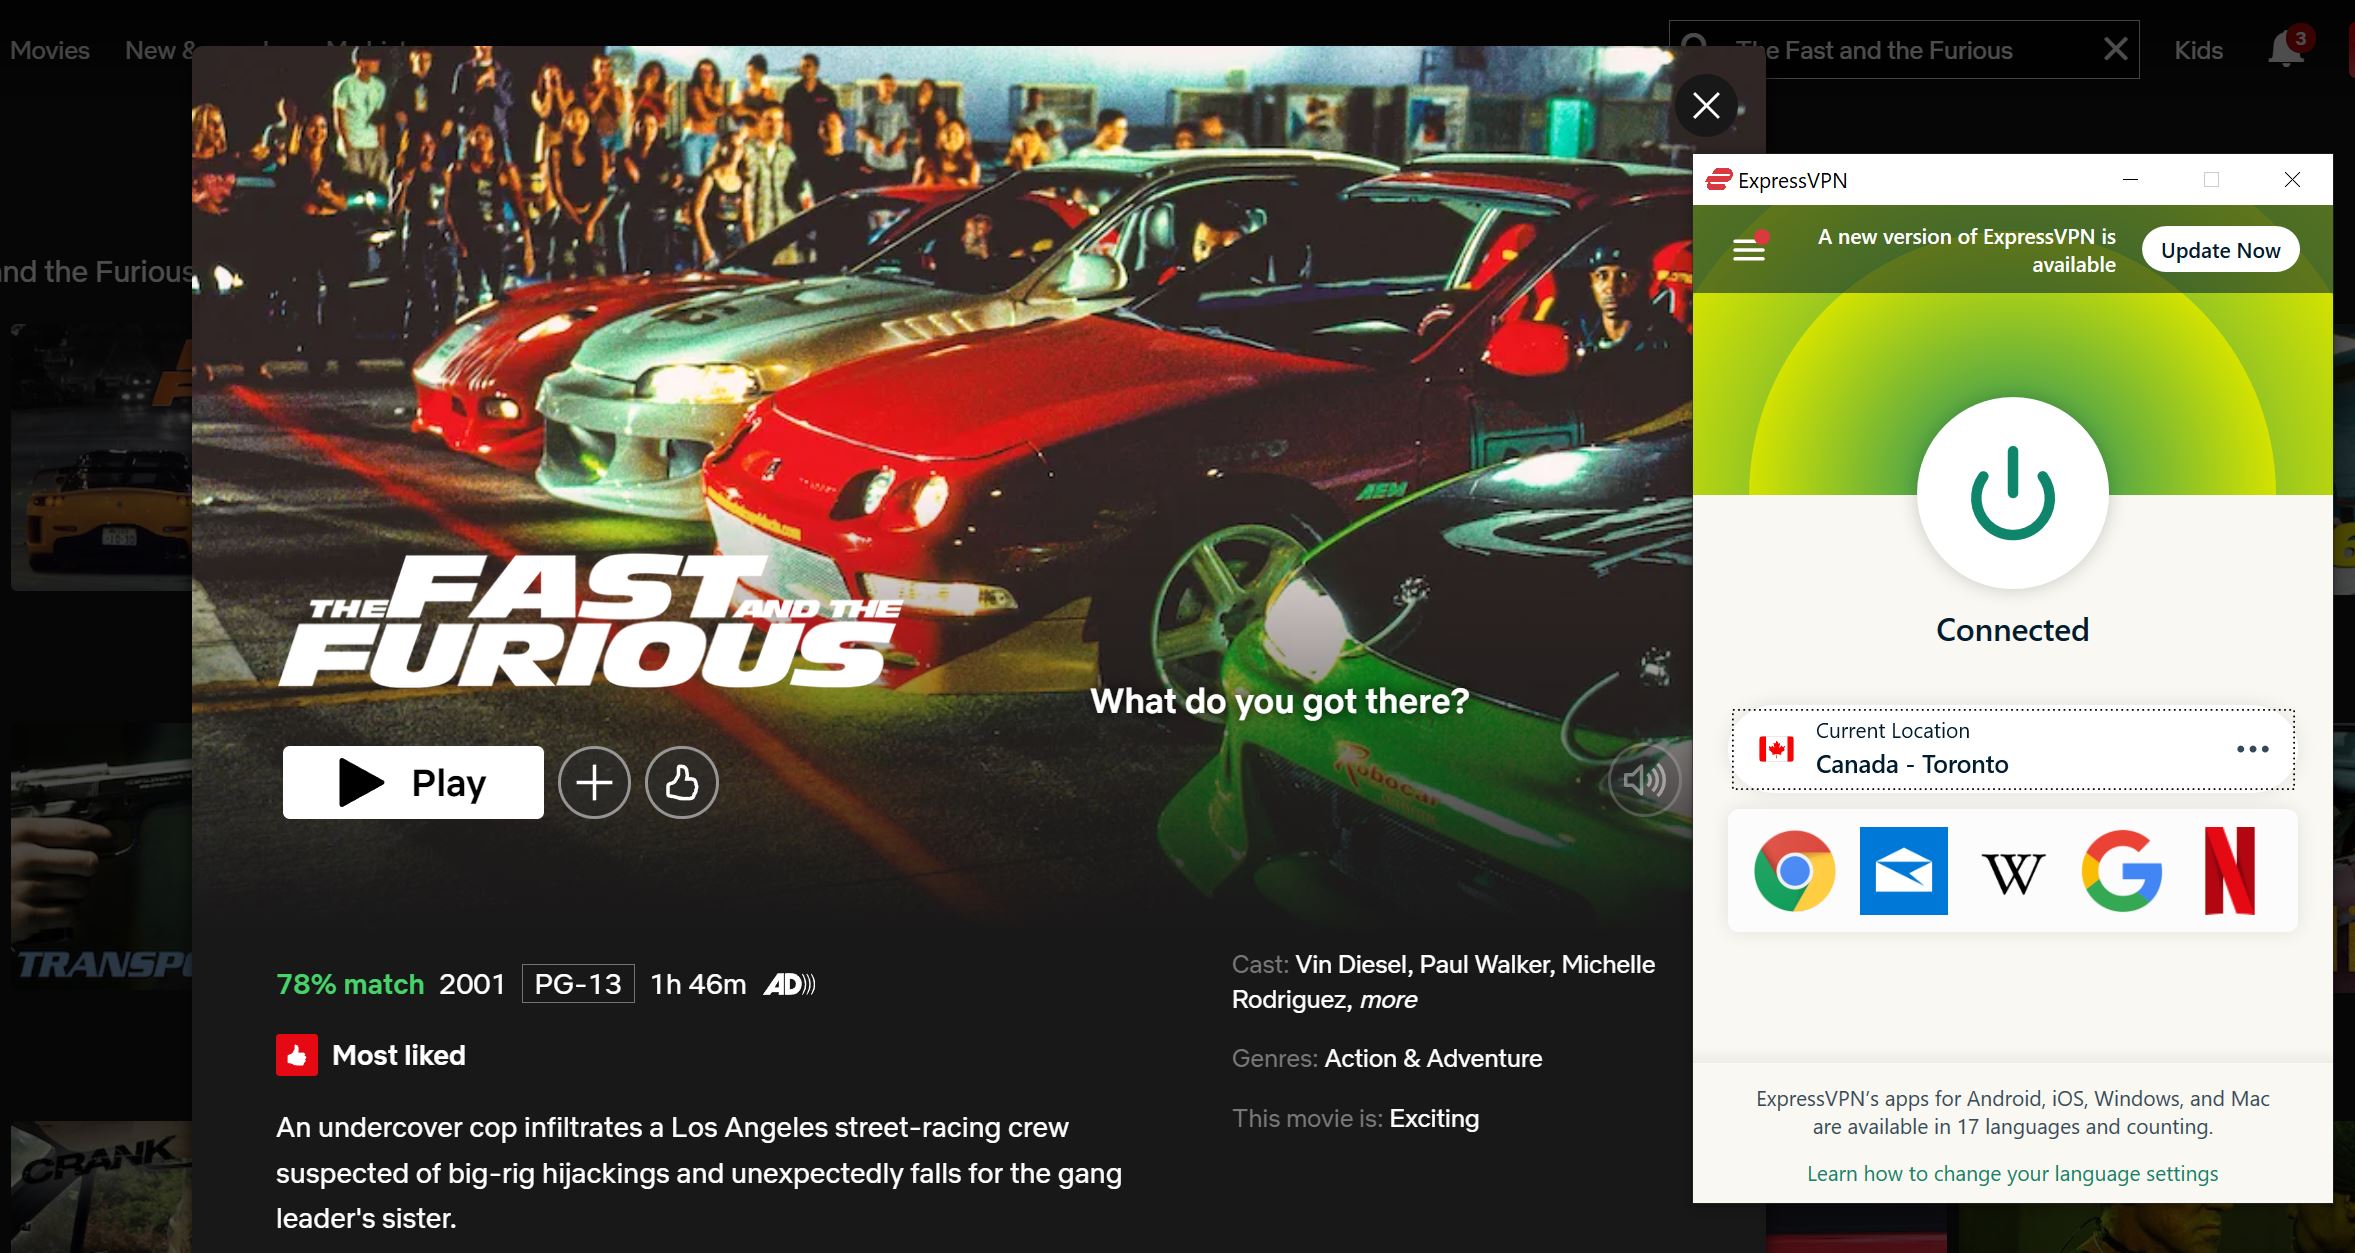 Fast and the Furious 1 on Netflix